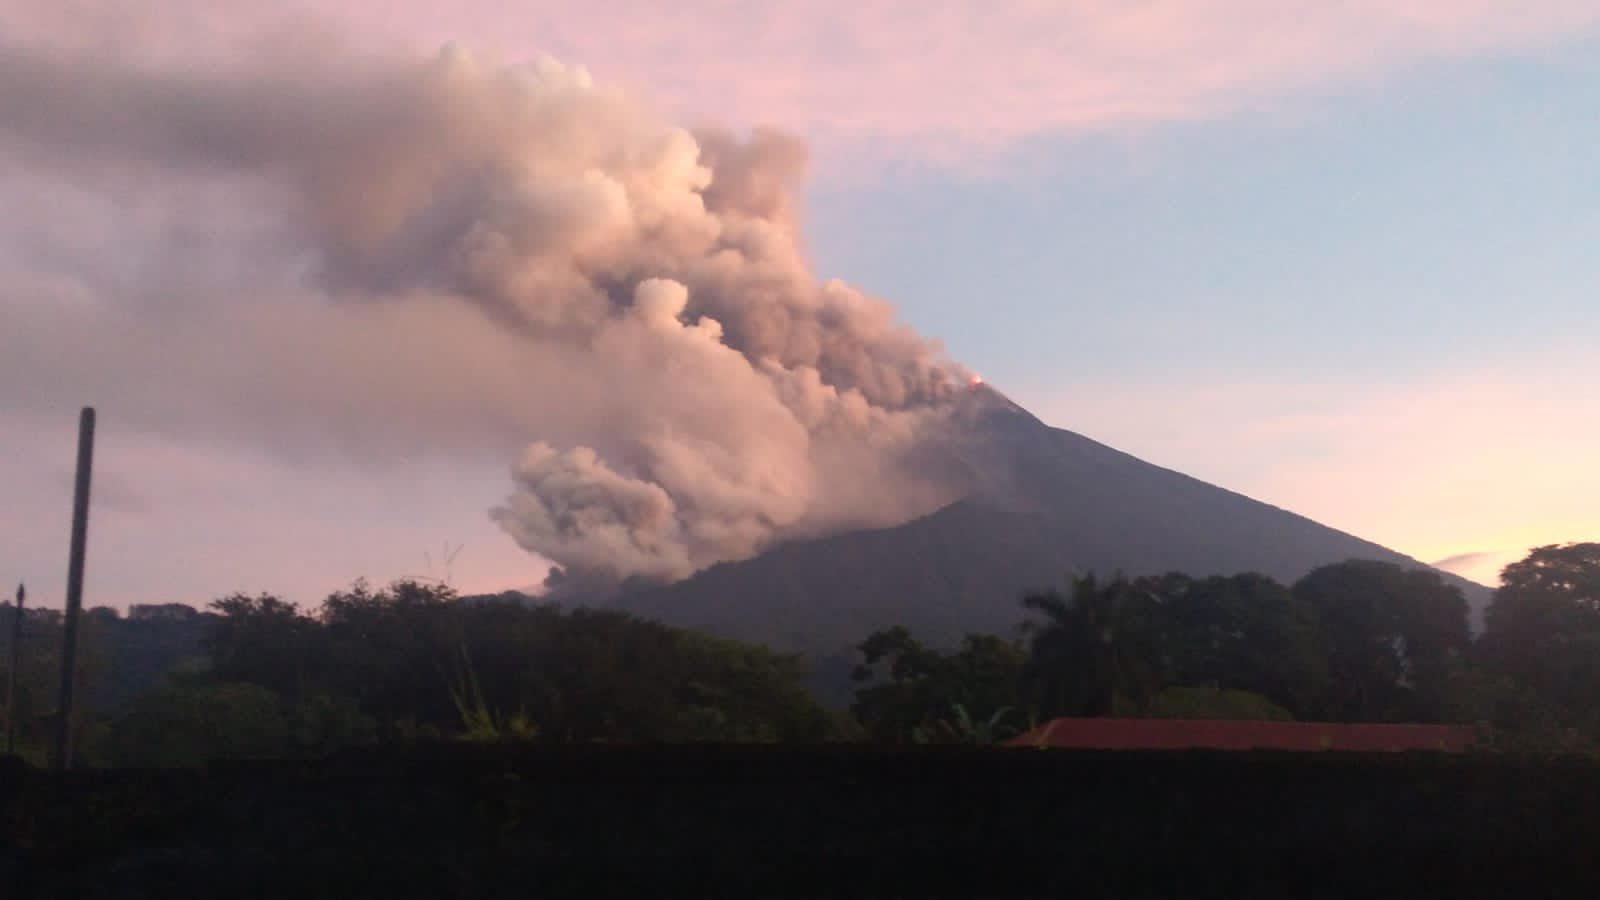 Phoenix clouds followed by the pyroclastic flow at Fuego volcano today (image: @William_Chigna/twitter)